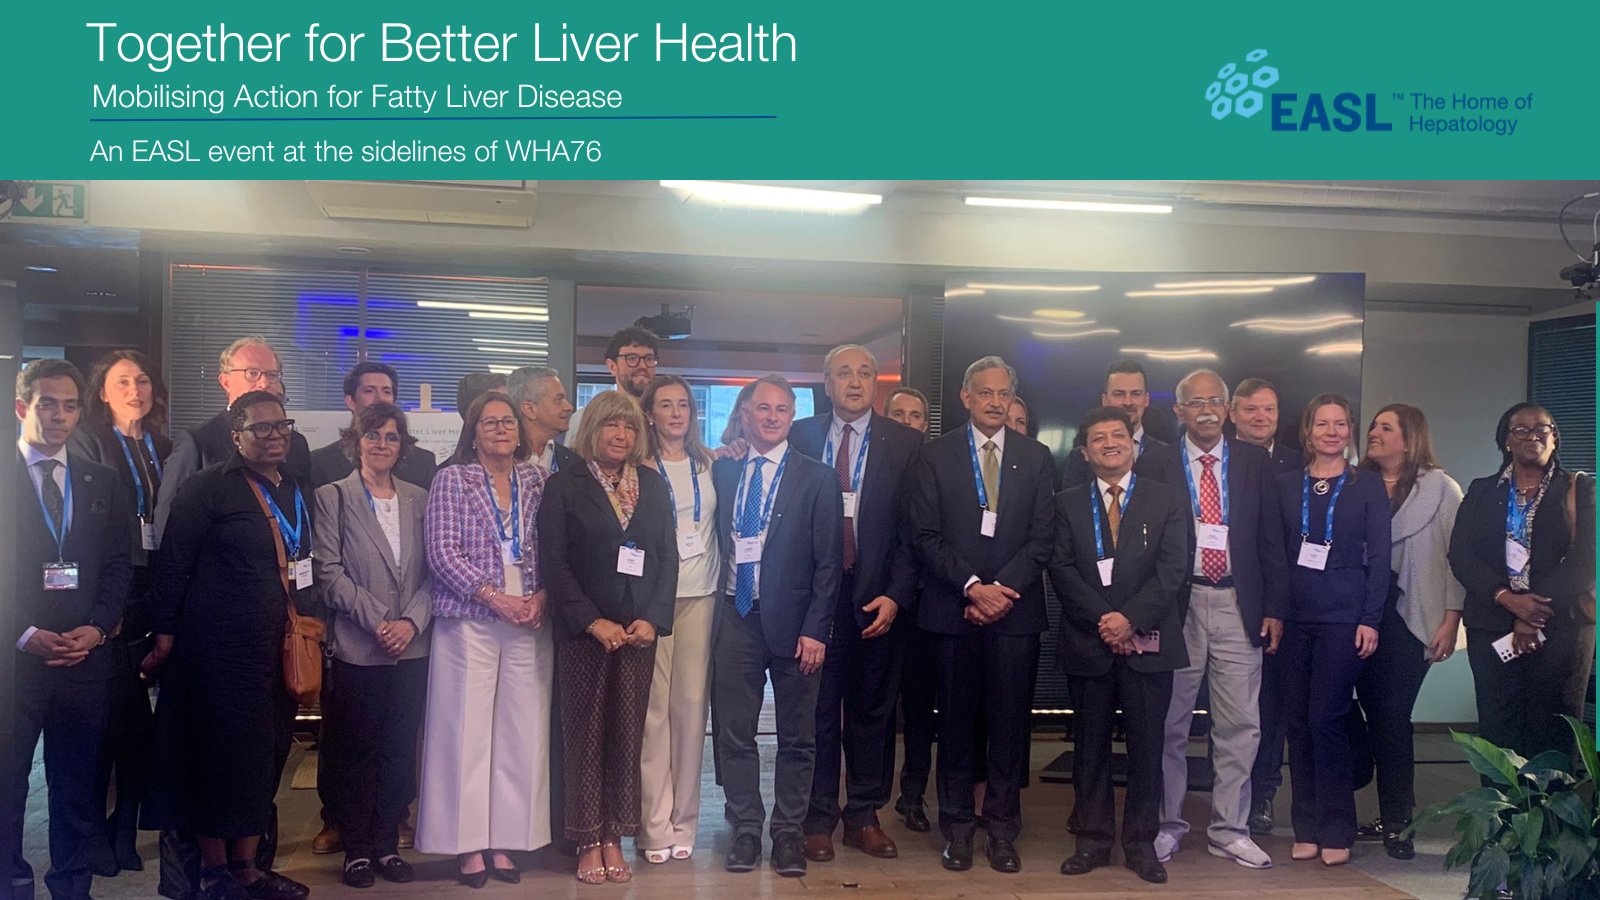 Promoting Liver Health: an urgent Call for Action at WHO